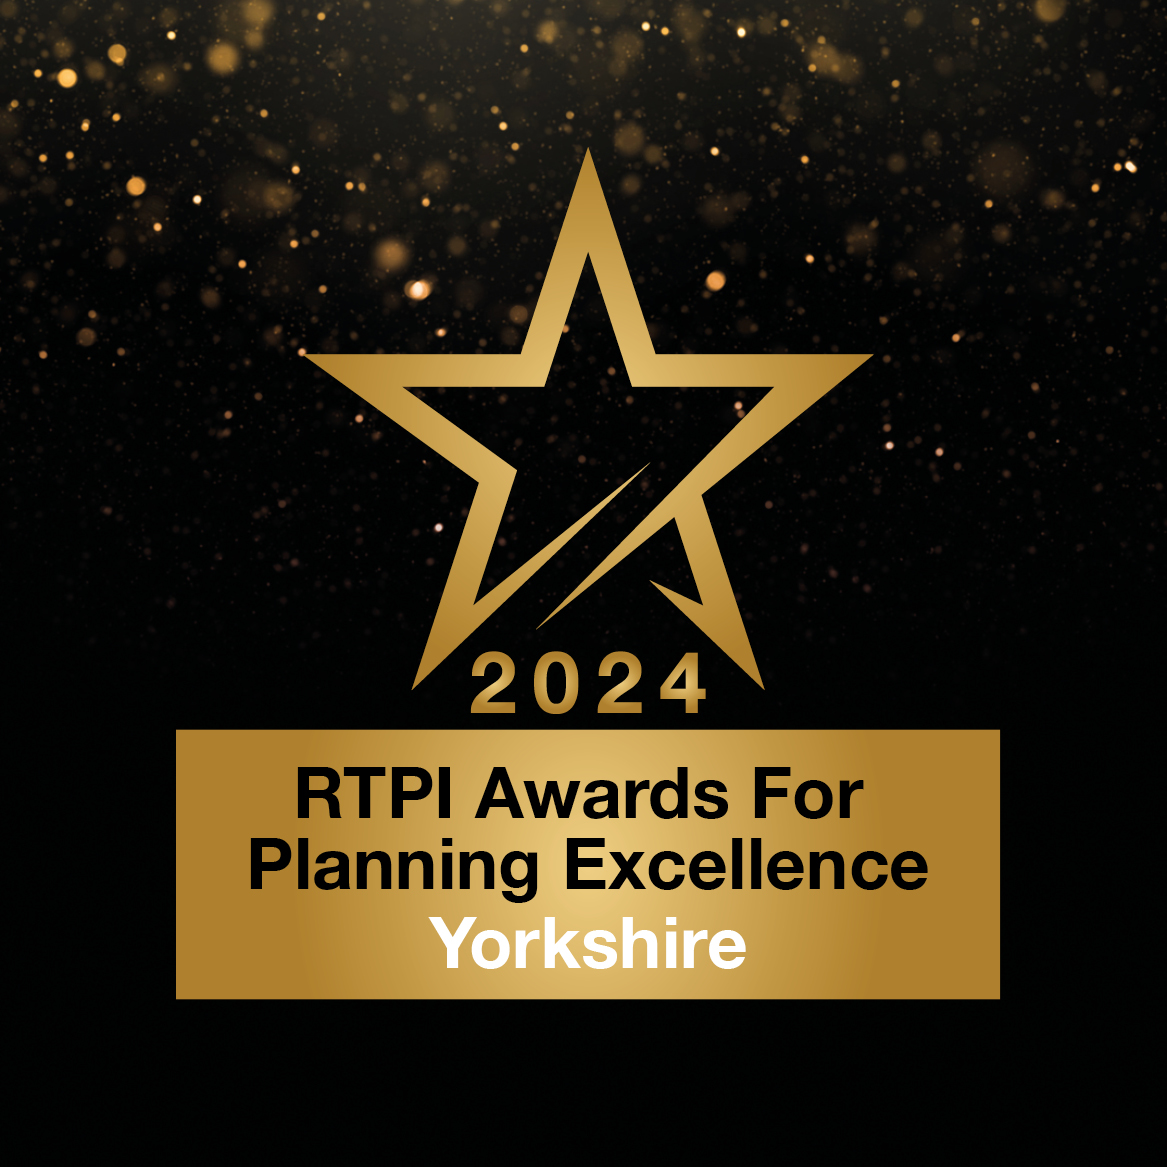 The RTPI Yorkshire Awards for Planning Excellence 2024 is now open for entries. If you’re a planner who has delivered great work in 2023 these awards are for you. Find out more tinyurl.com/2tx3au9k